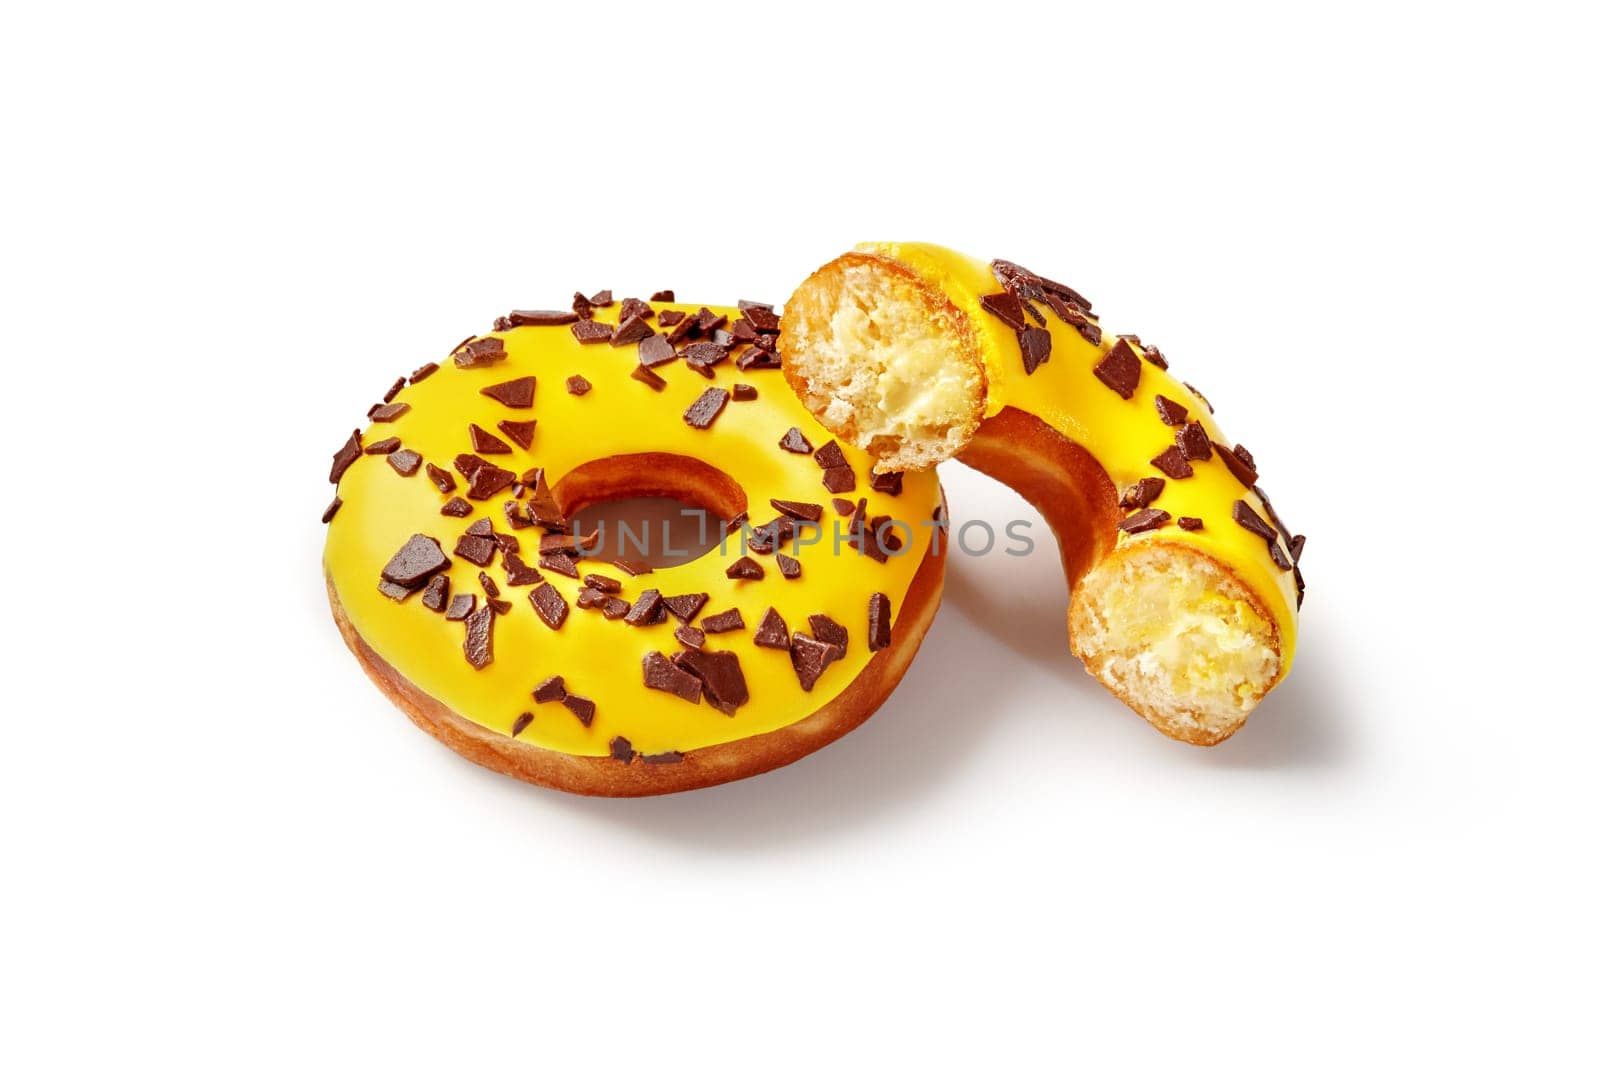 Appetizing fluffy donuts with tropic taste, filled with mango and passion fruit flavored buttercream, topped with vibrant yellow icing isolated on white background